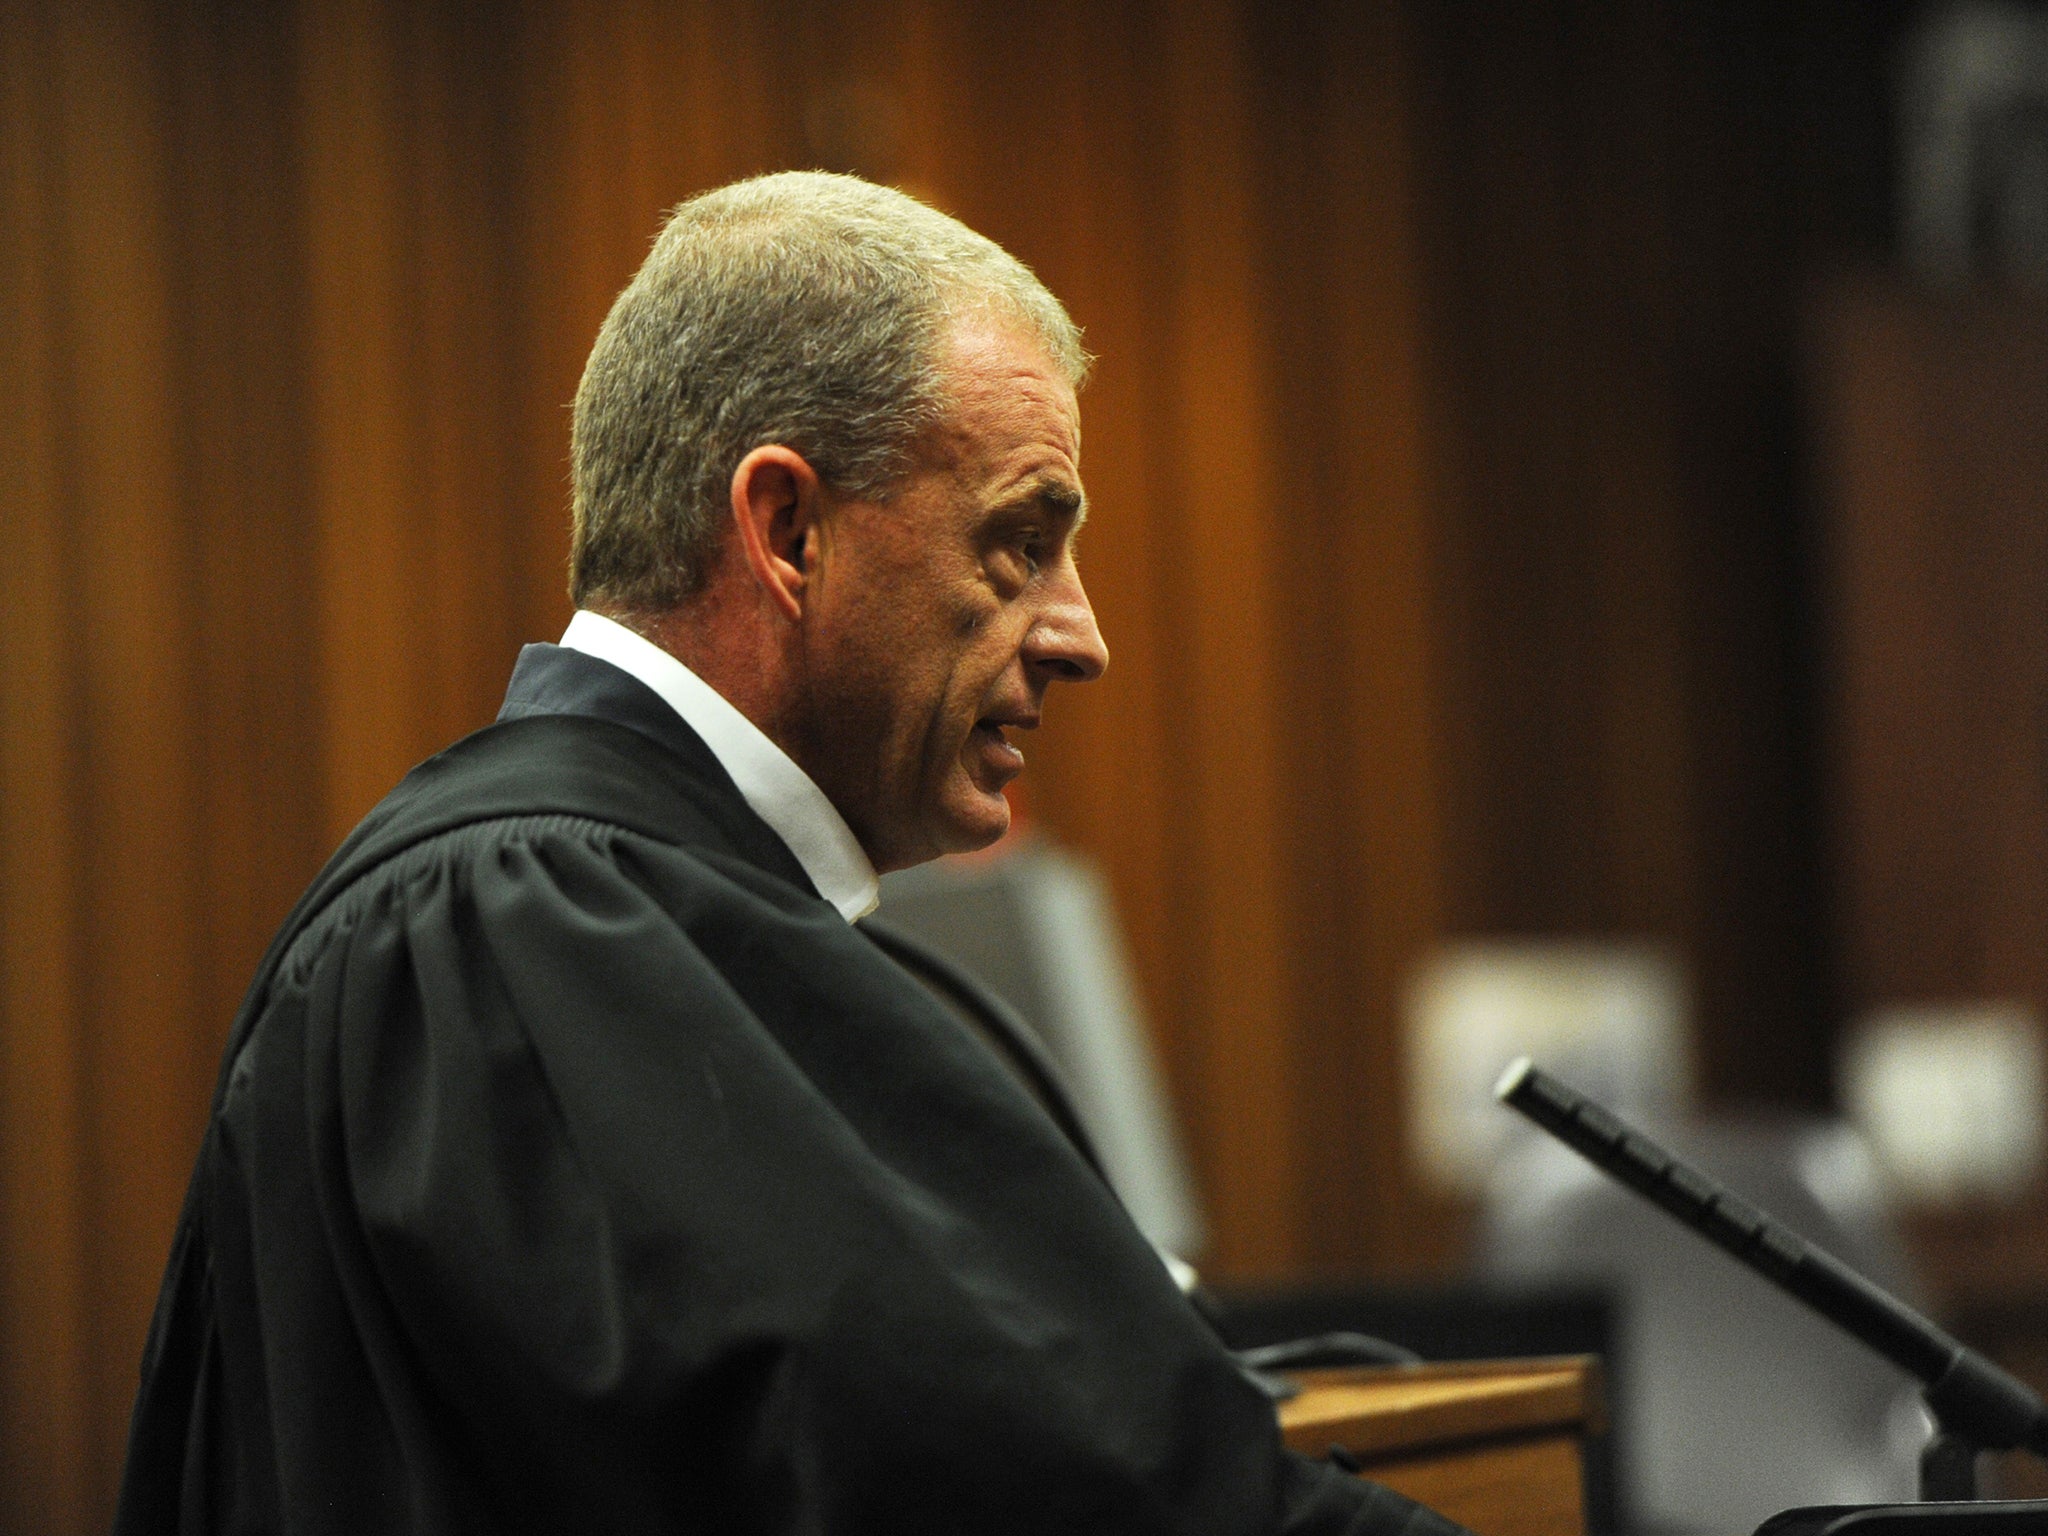 Prosecutor Gerrie Nel cross-examines a witness during the court appearance of Oscar Pistorius in his sentencing on a charge of culpable homicide at the High Court in Pretoria (Reuters)